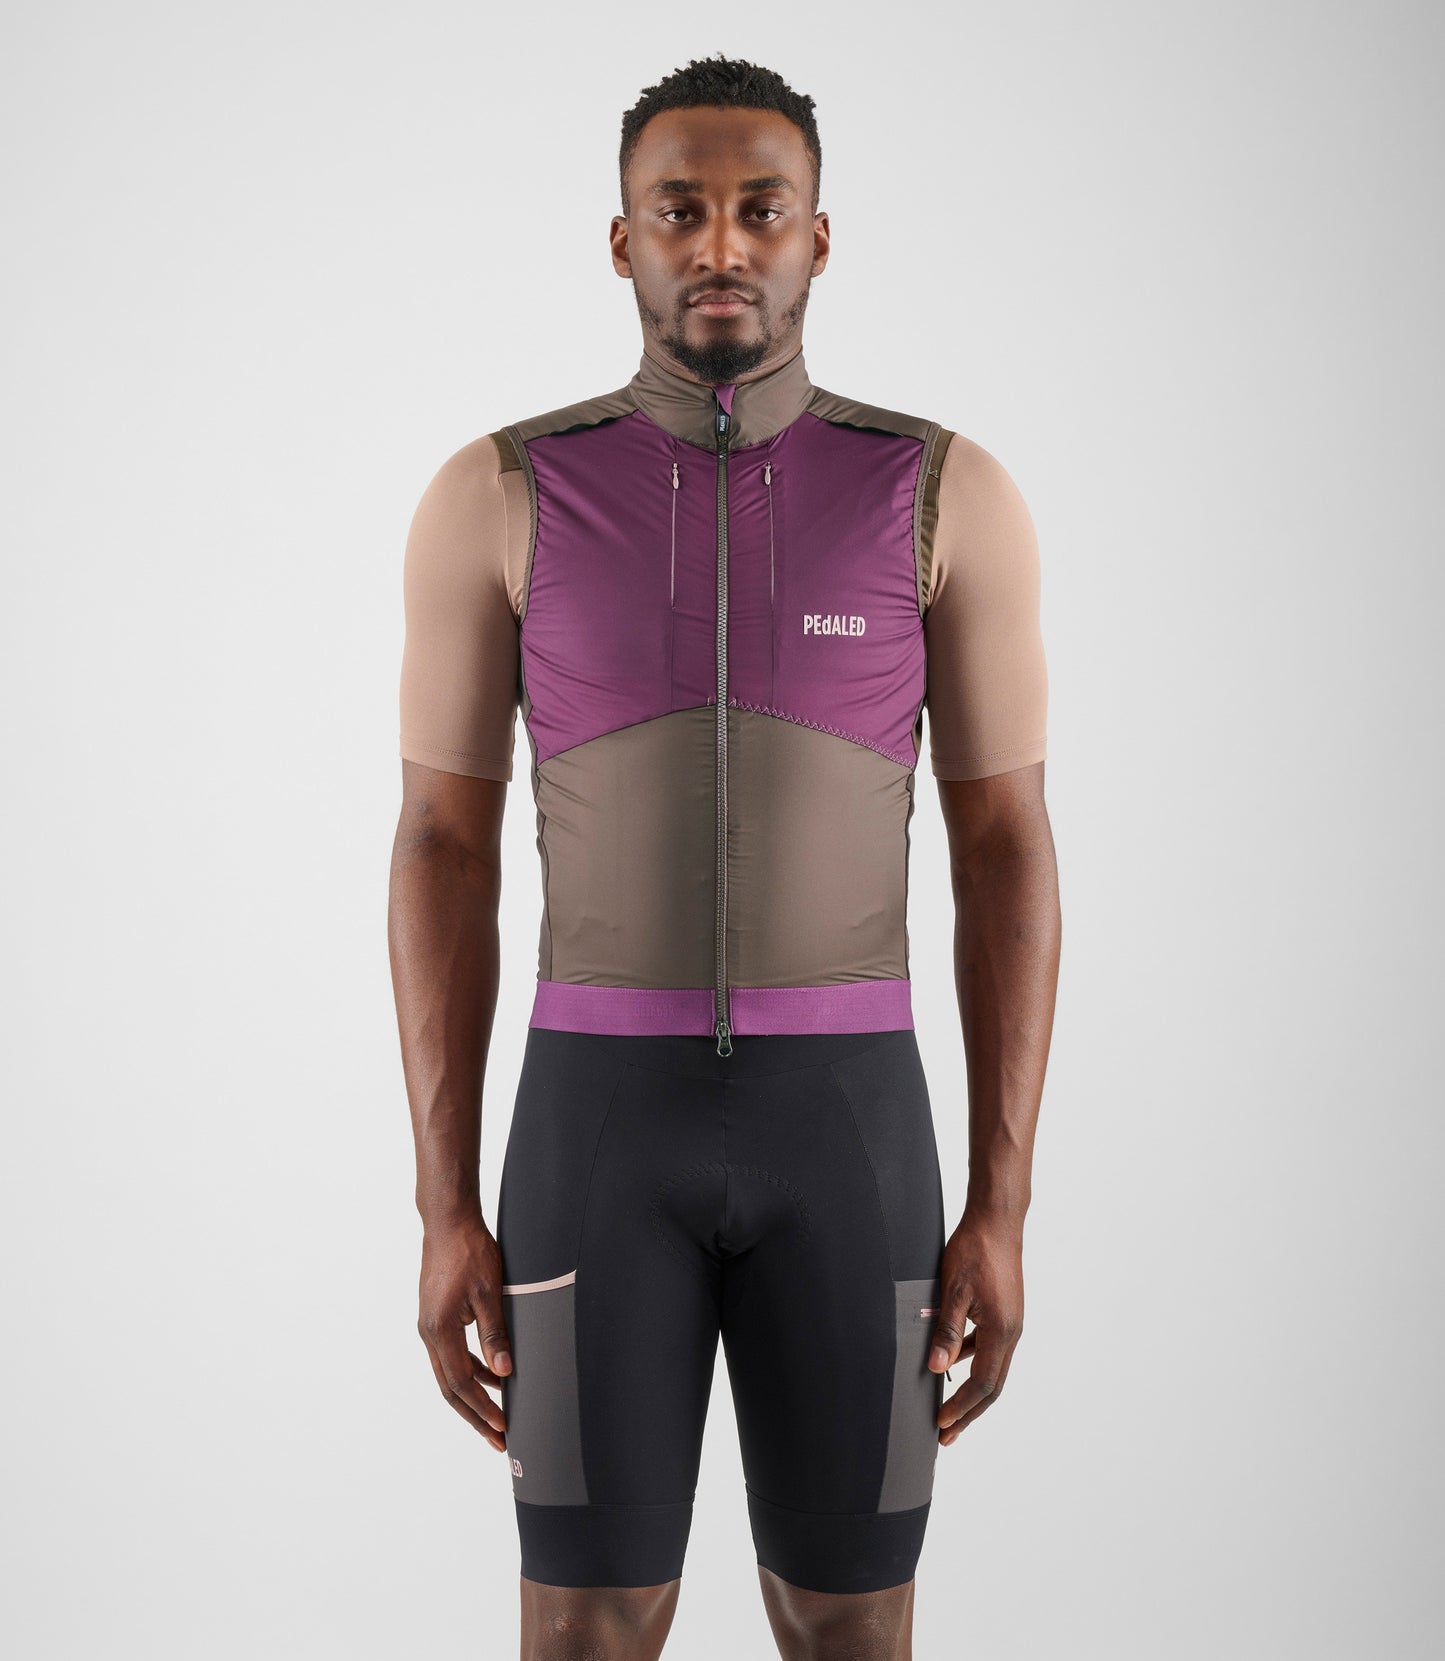 24SVEOD10PE_3_men cycling insulated vest purple odyssey total body front pedaled